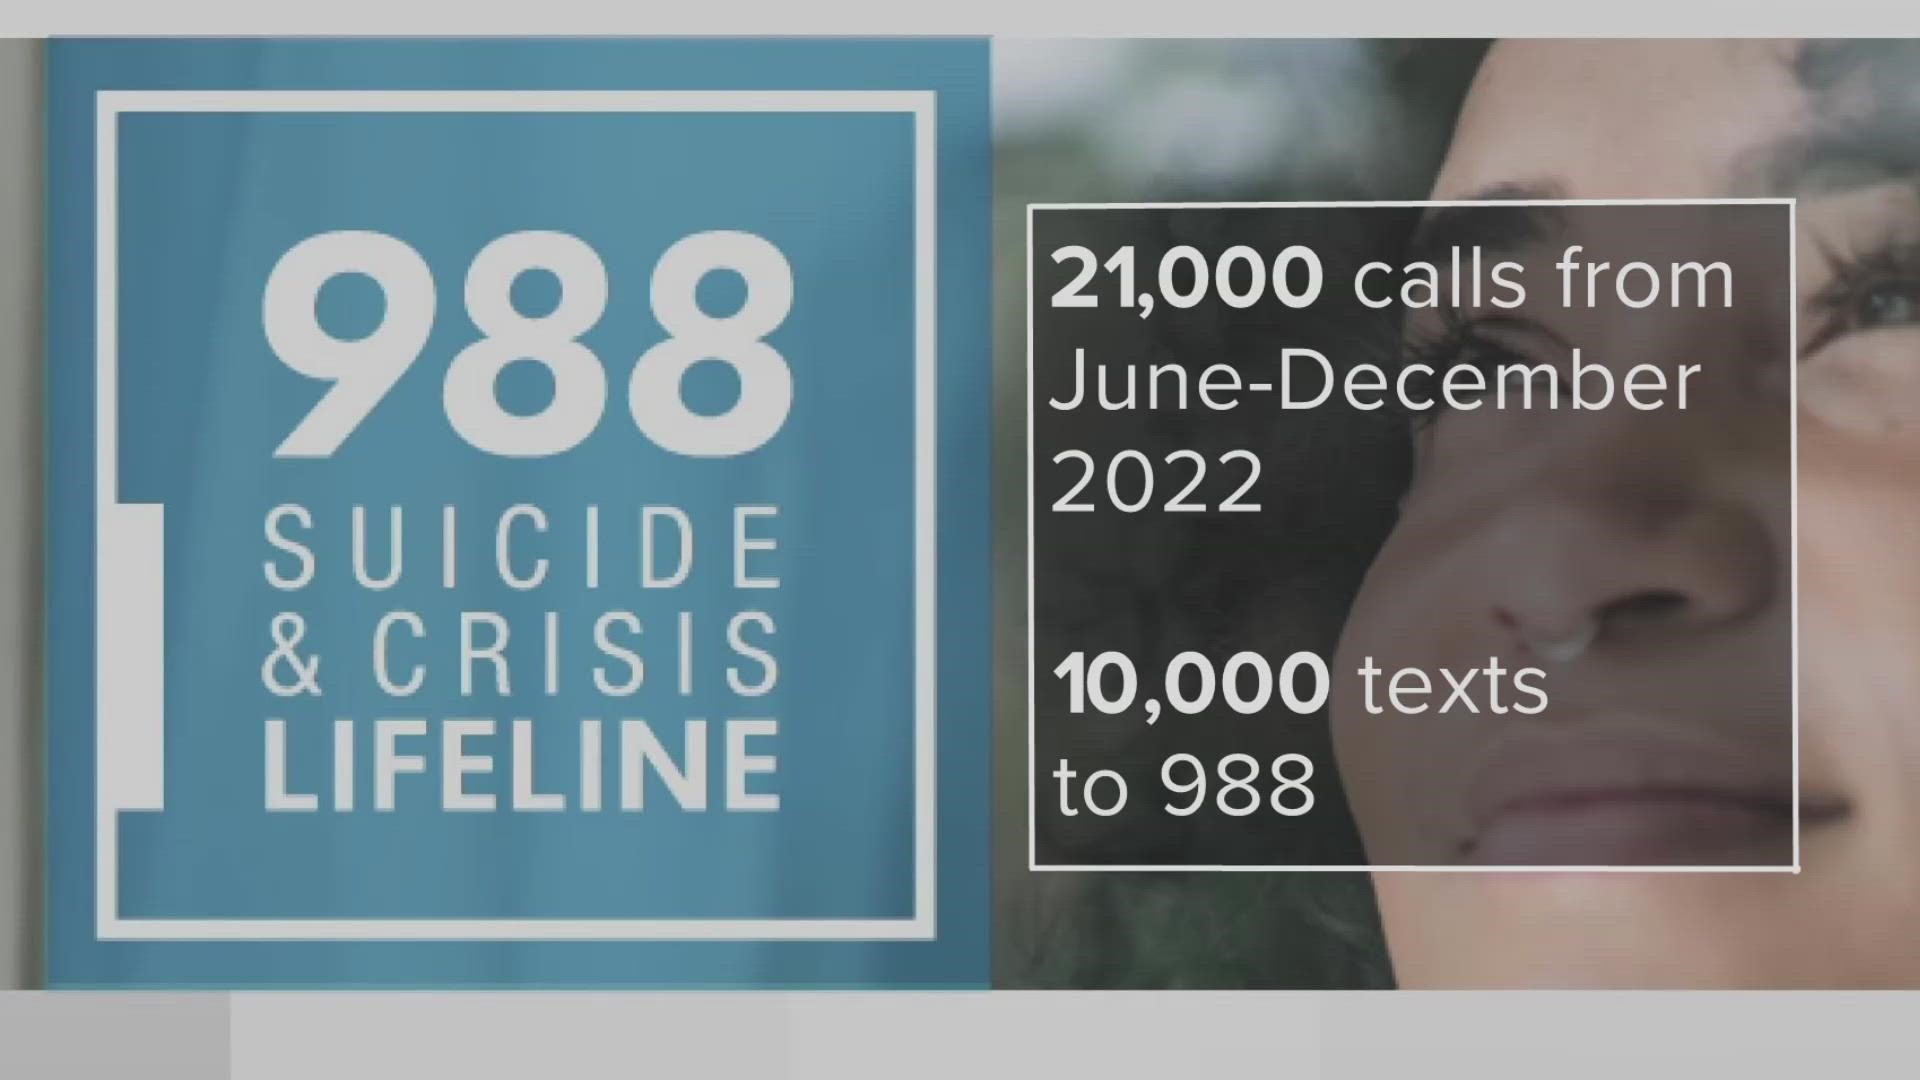 According to state data, there were also around 21,000 calls to 988 in the last six months of 2022.